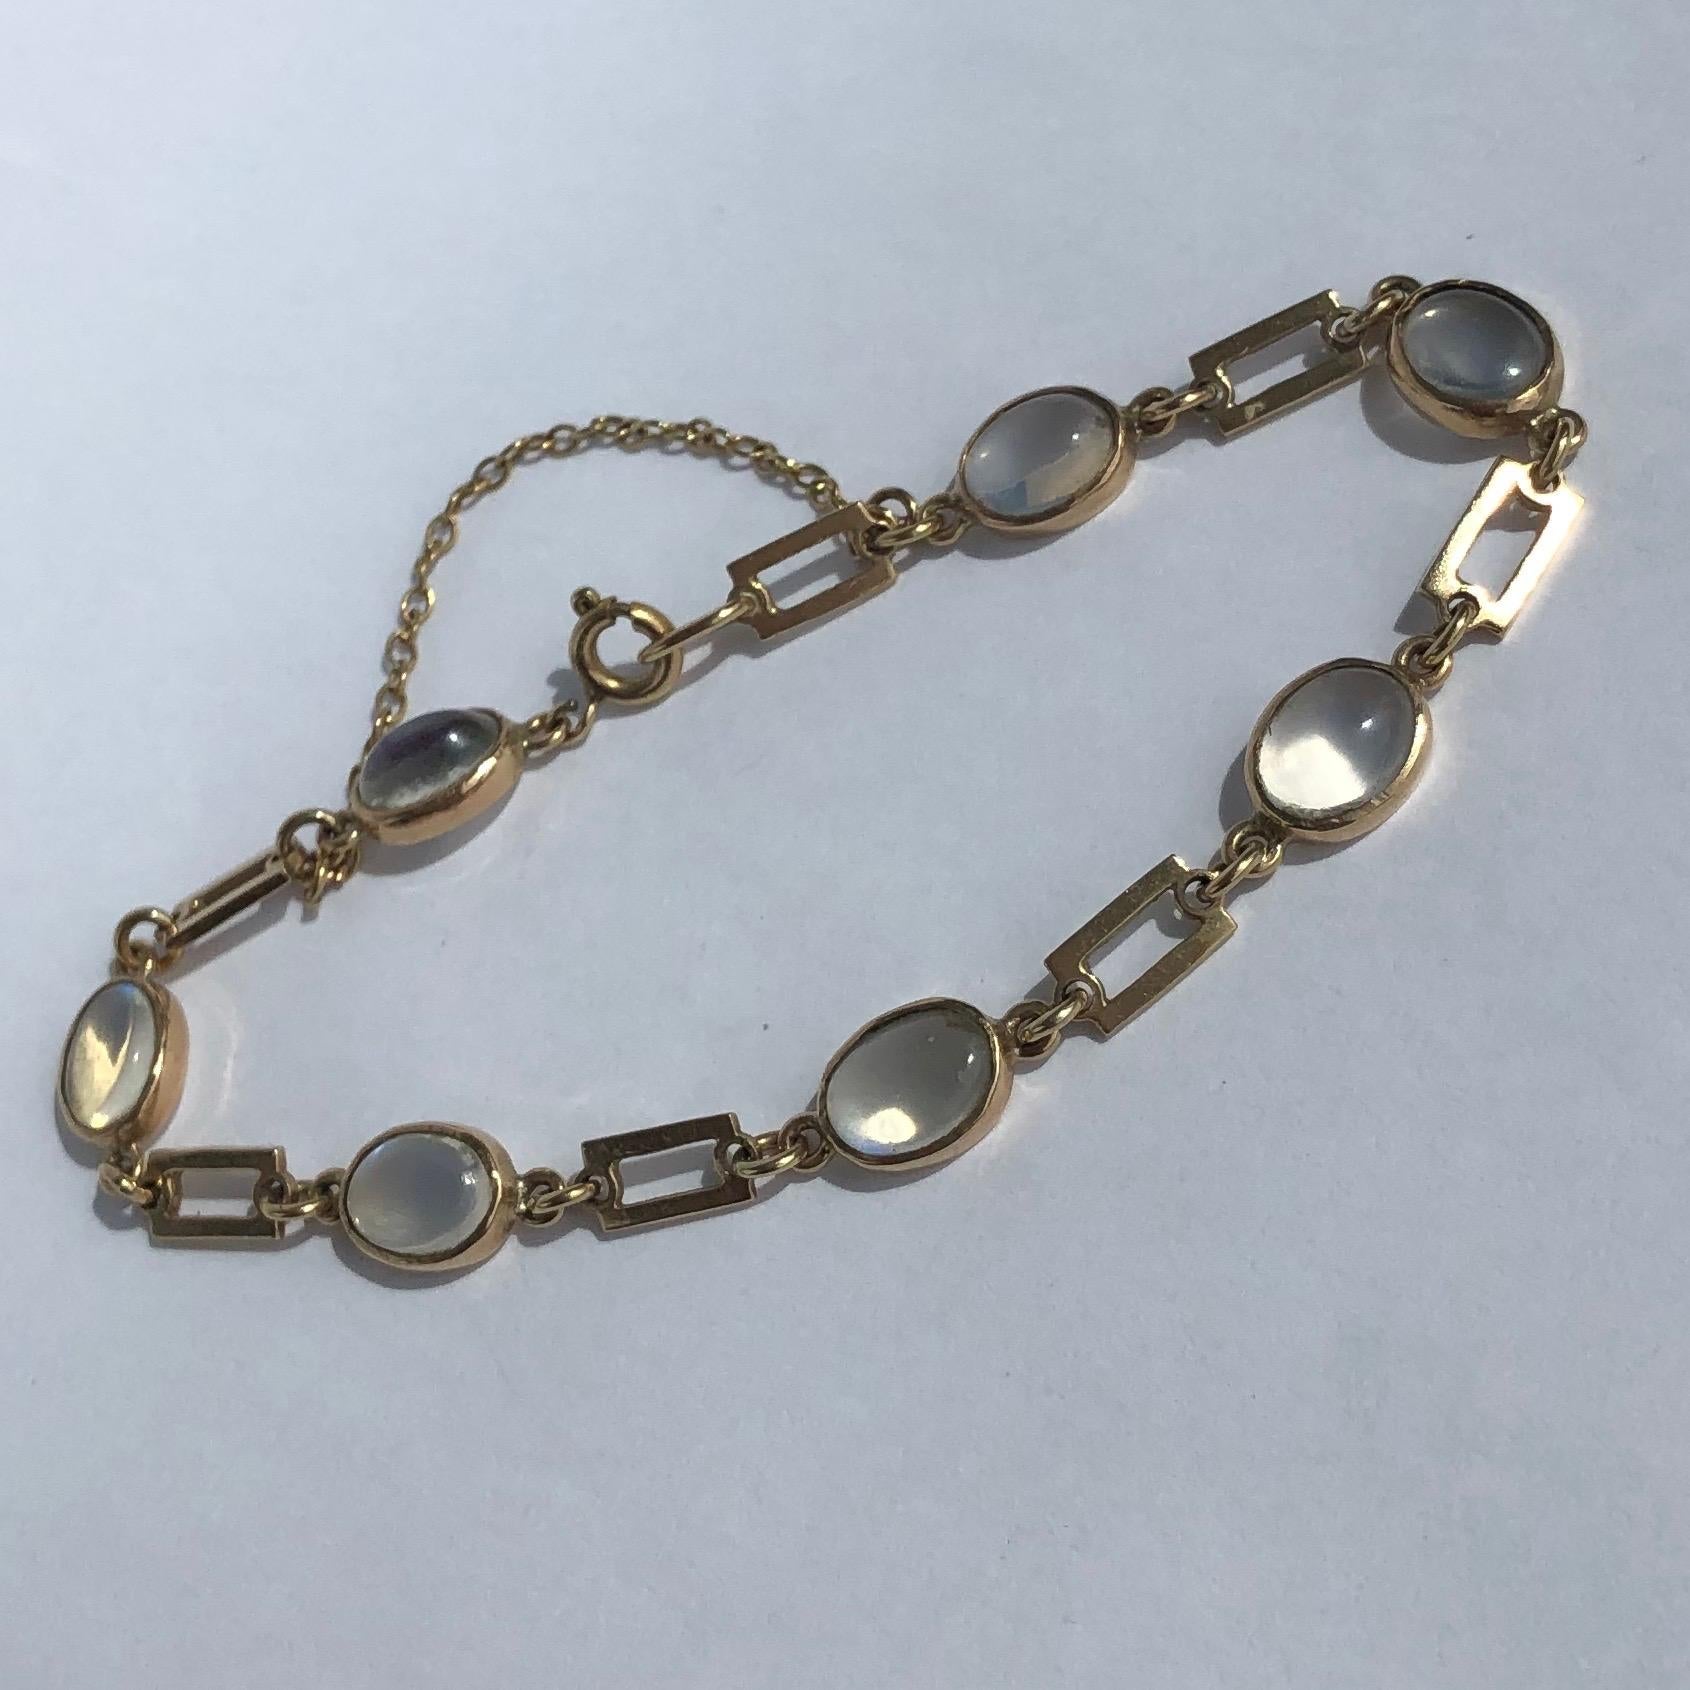 This wonderful bracelet holds 7 moonstones and the chain is beautifully modern in style with its fence like links. The stones have a wonderful blue hue and are complimented perfectly by the yellow gold. 

Bracelet length: 18cm 
Width: 7mm
Stone